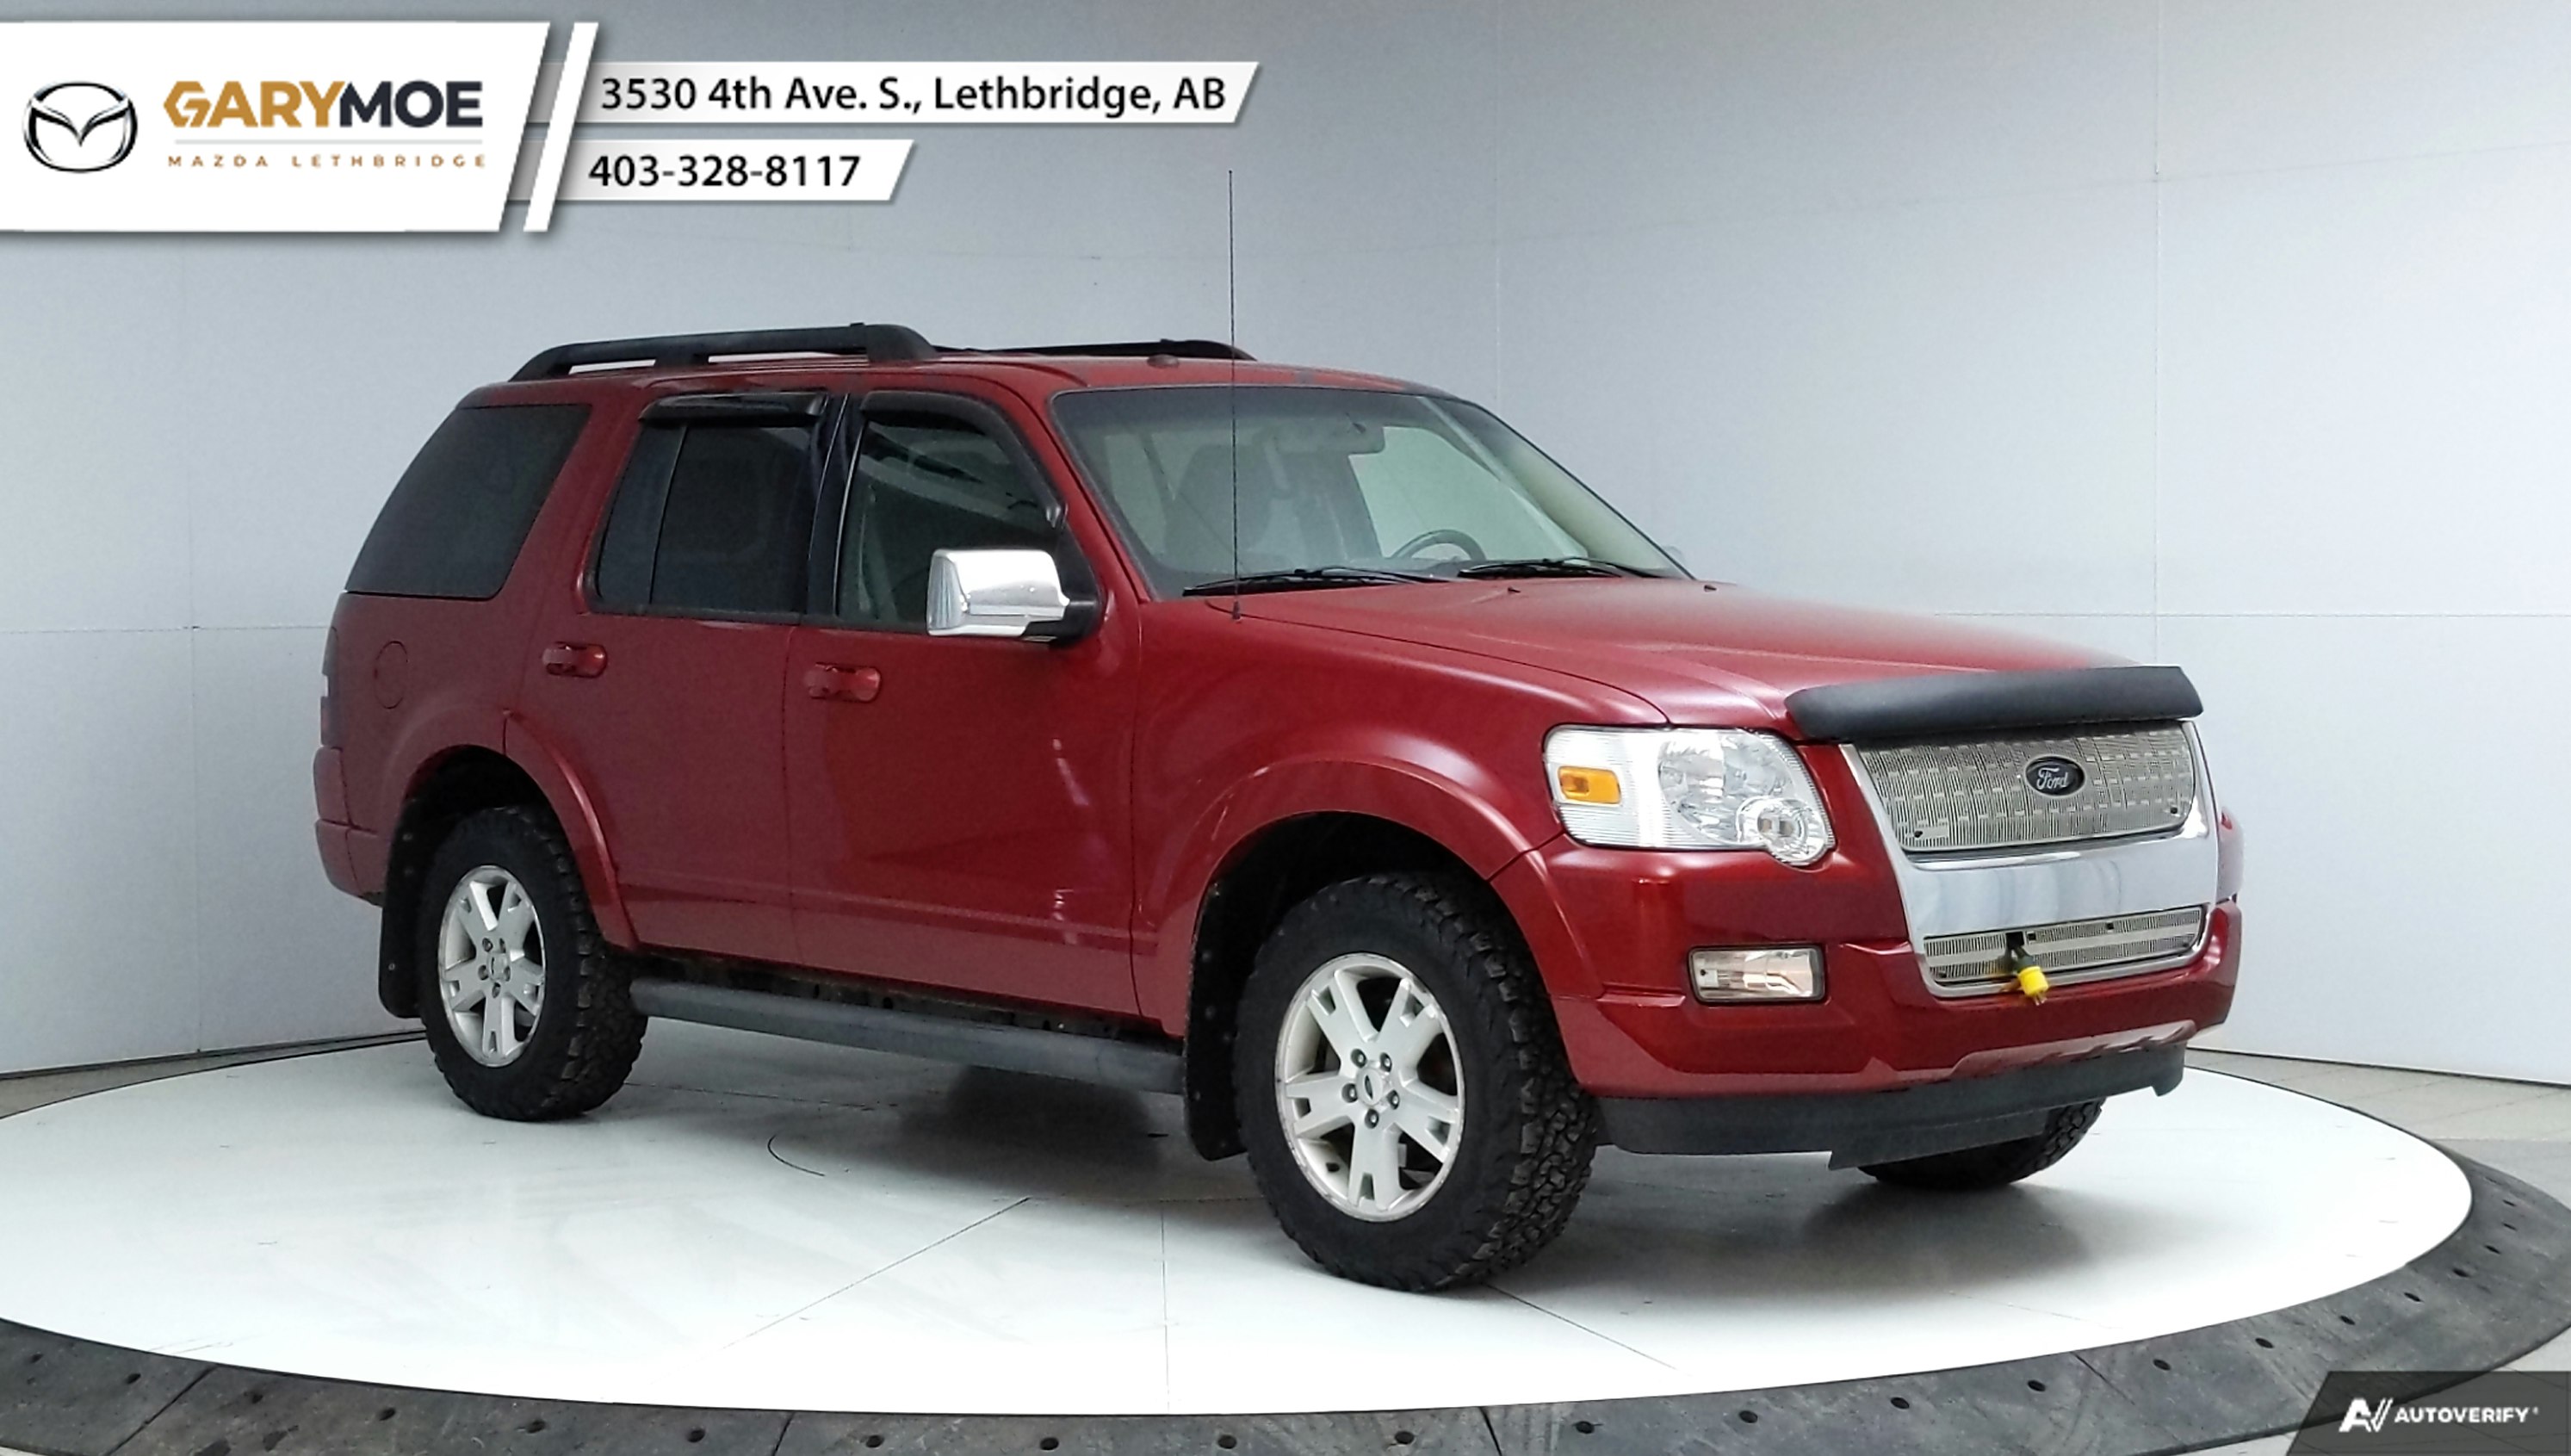 2009 Ford Explorer XLT (5 Seat Only) (Stk: 24-3268A) in Lethbridge - Image 1 of 35